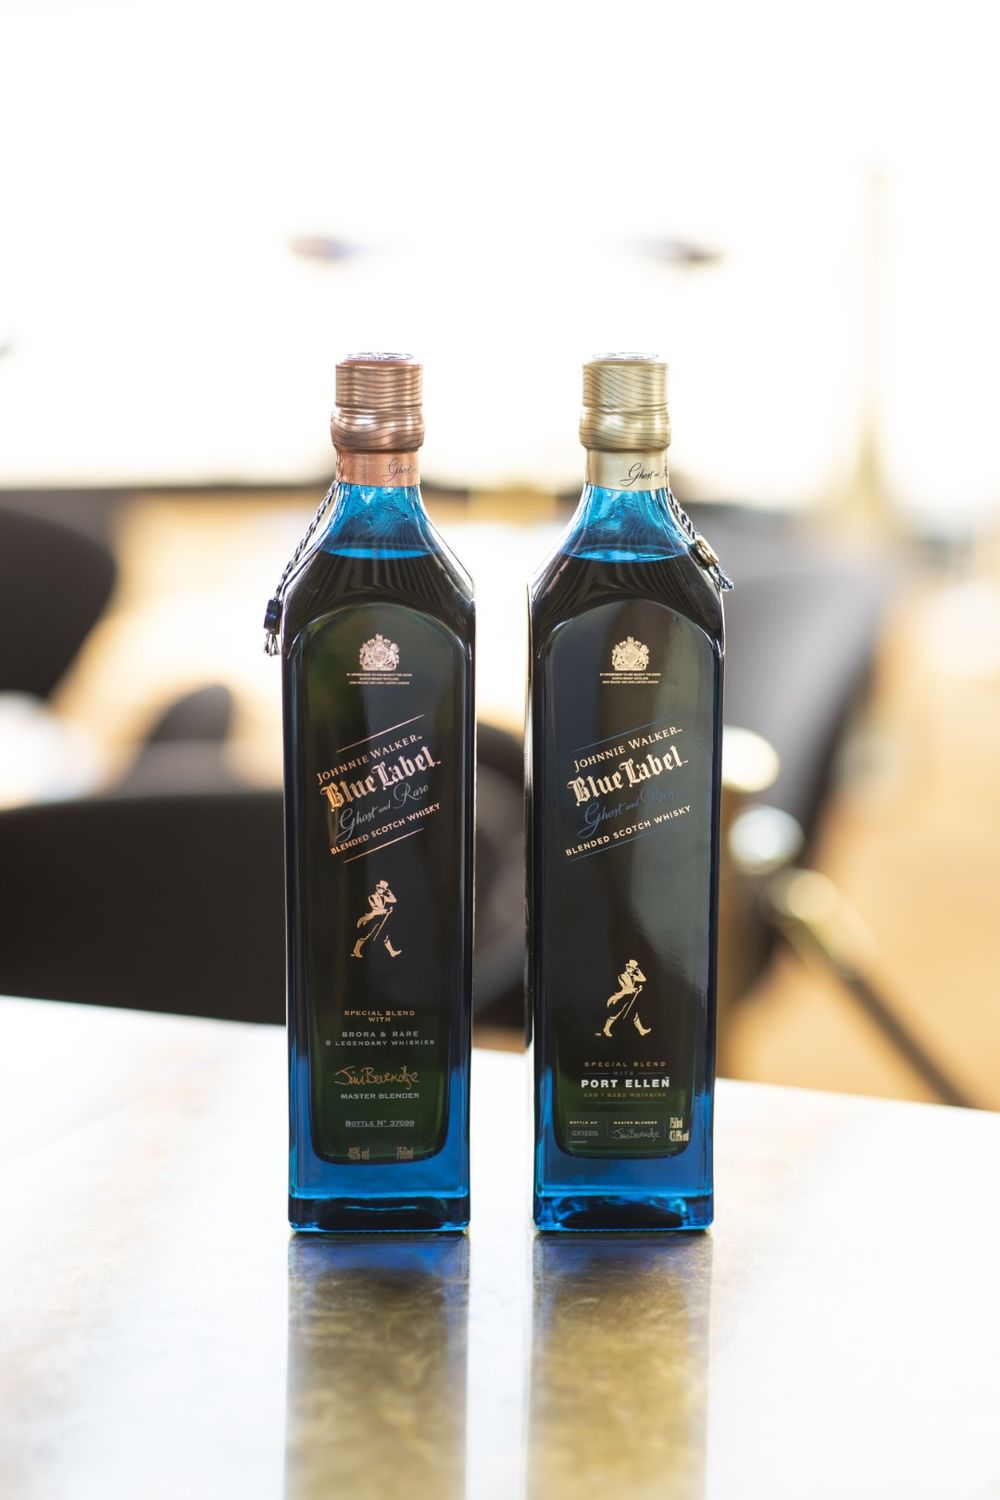 <strong>Johnnie Walker Blue Label Ghost and Rare Port Ellen</strong> has the 'Port Ellen' Islay single malt at the heart of it, from the Port Ellen distillery that closed its doors in 1983